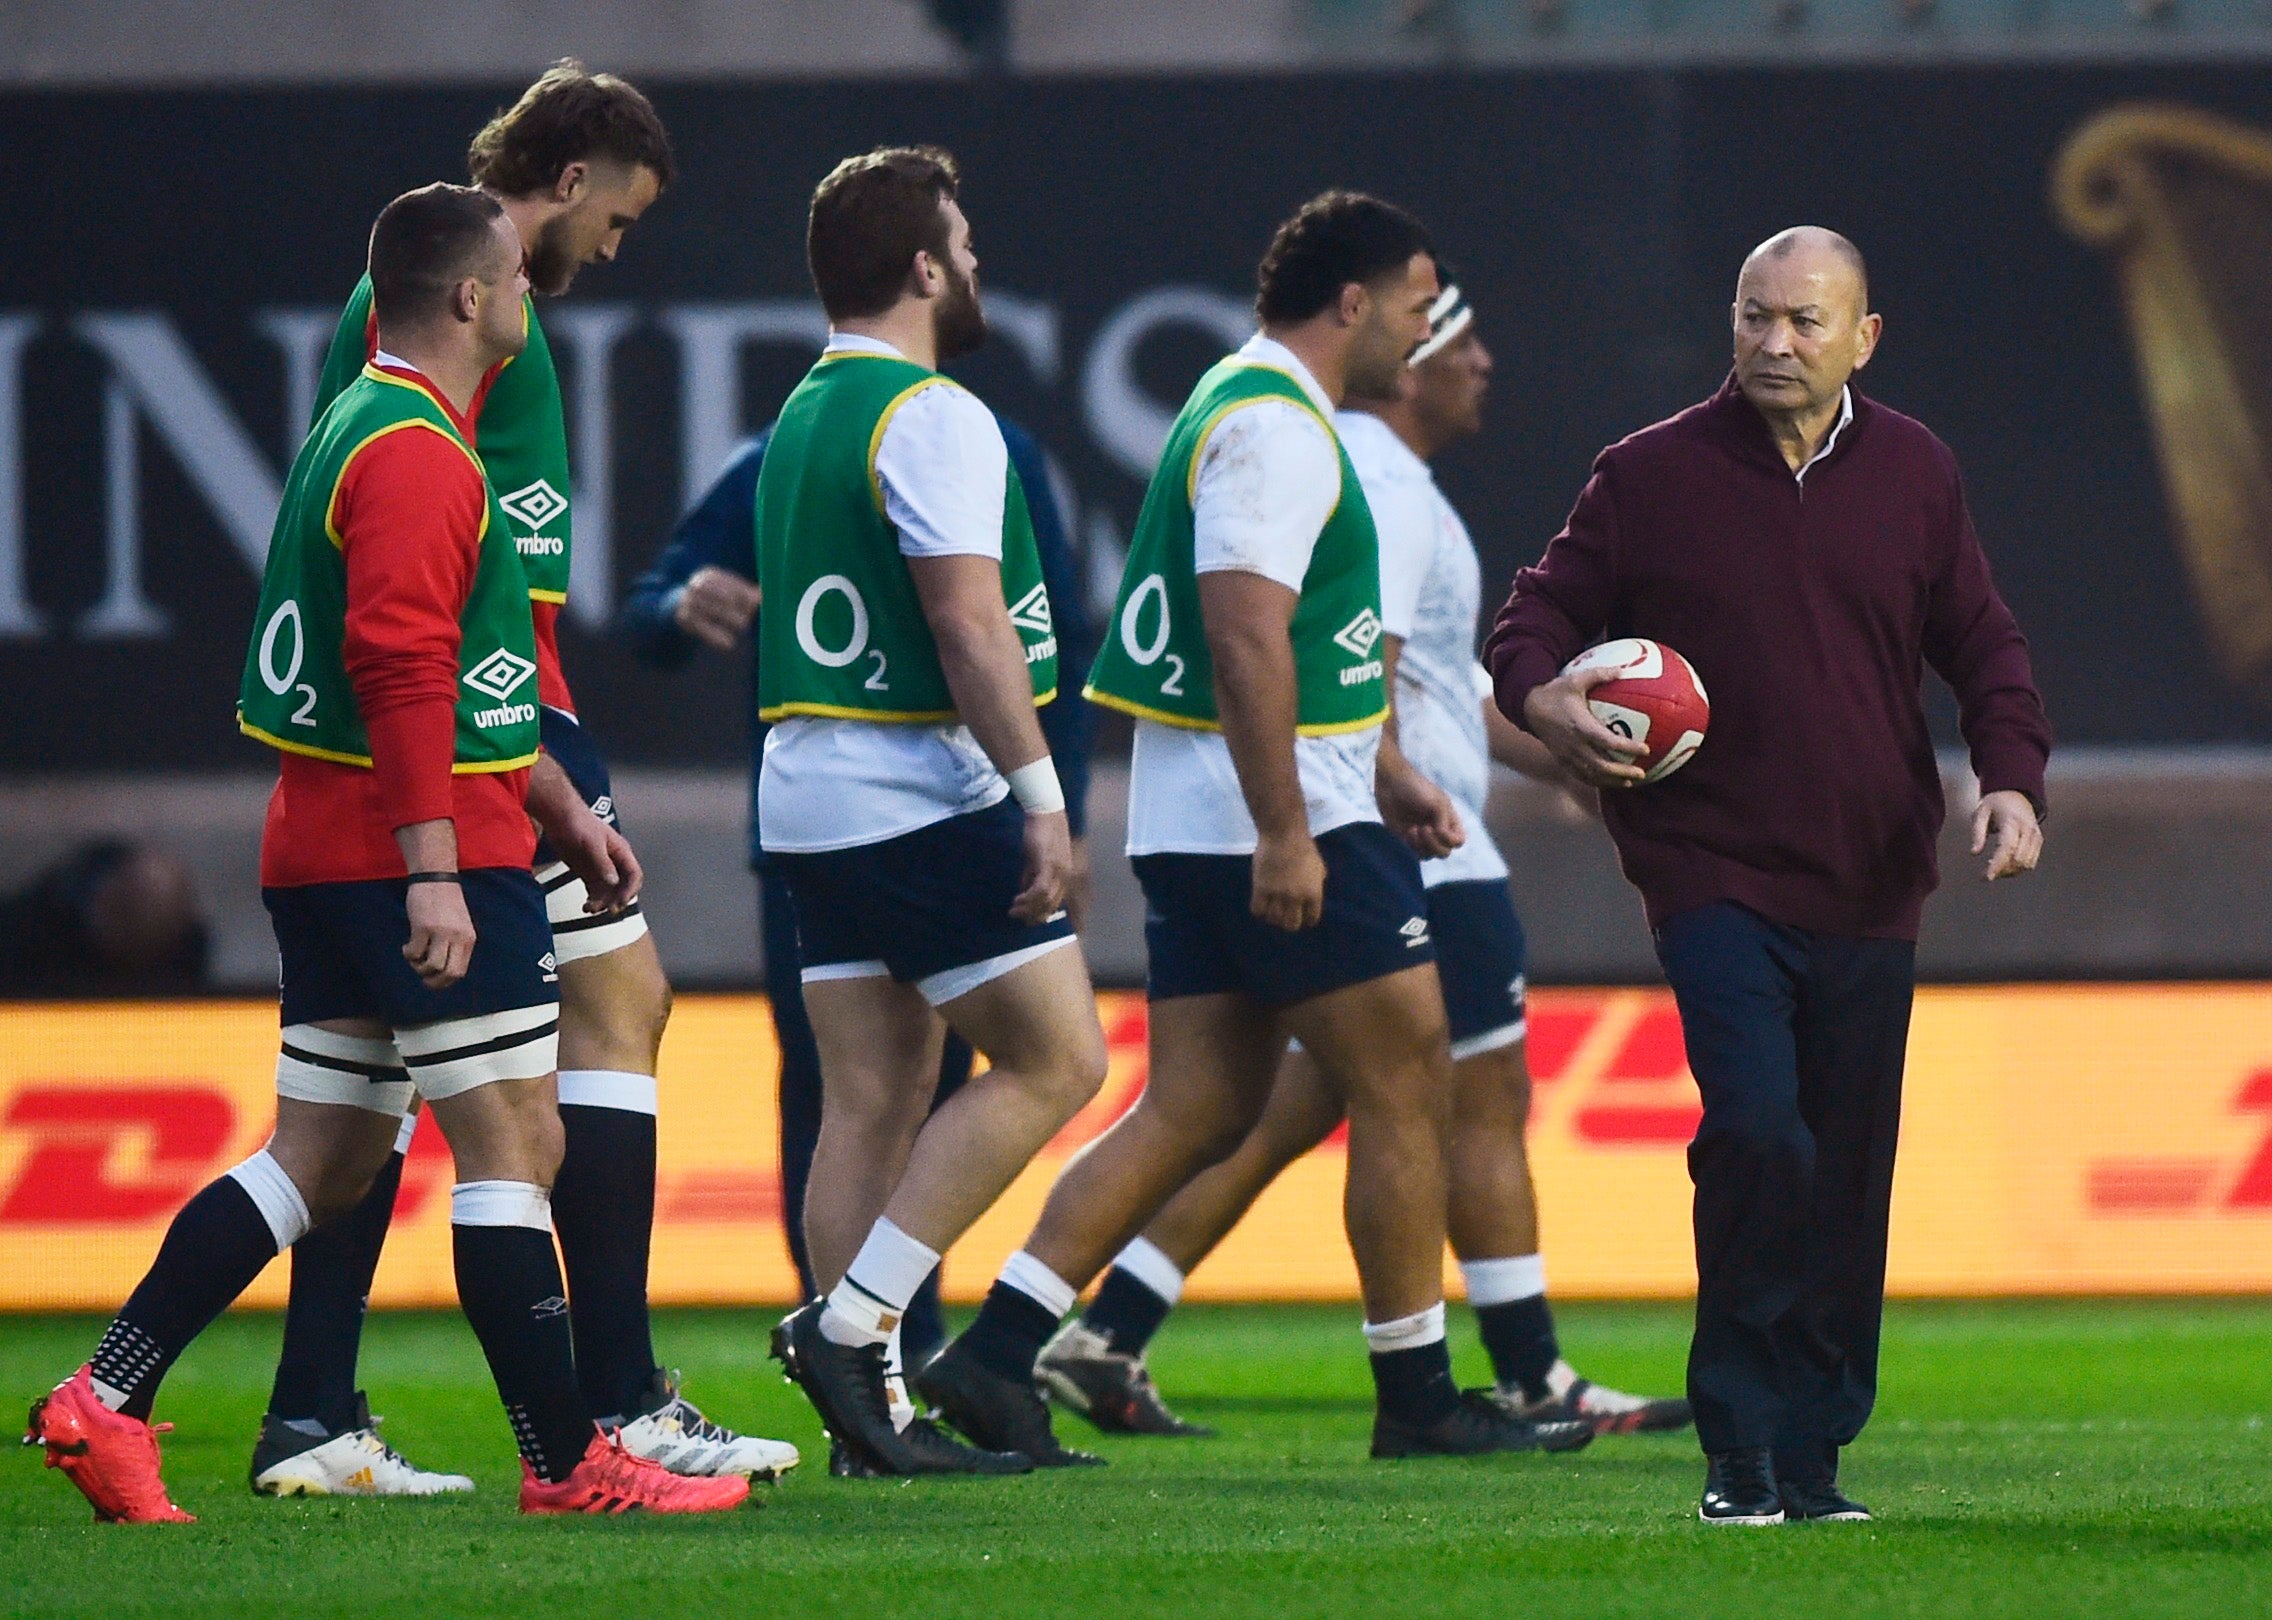 Jones believes rugby will get back to the type of play witnessed at the last World Cup